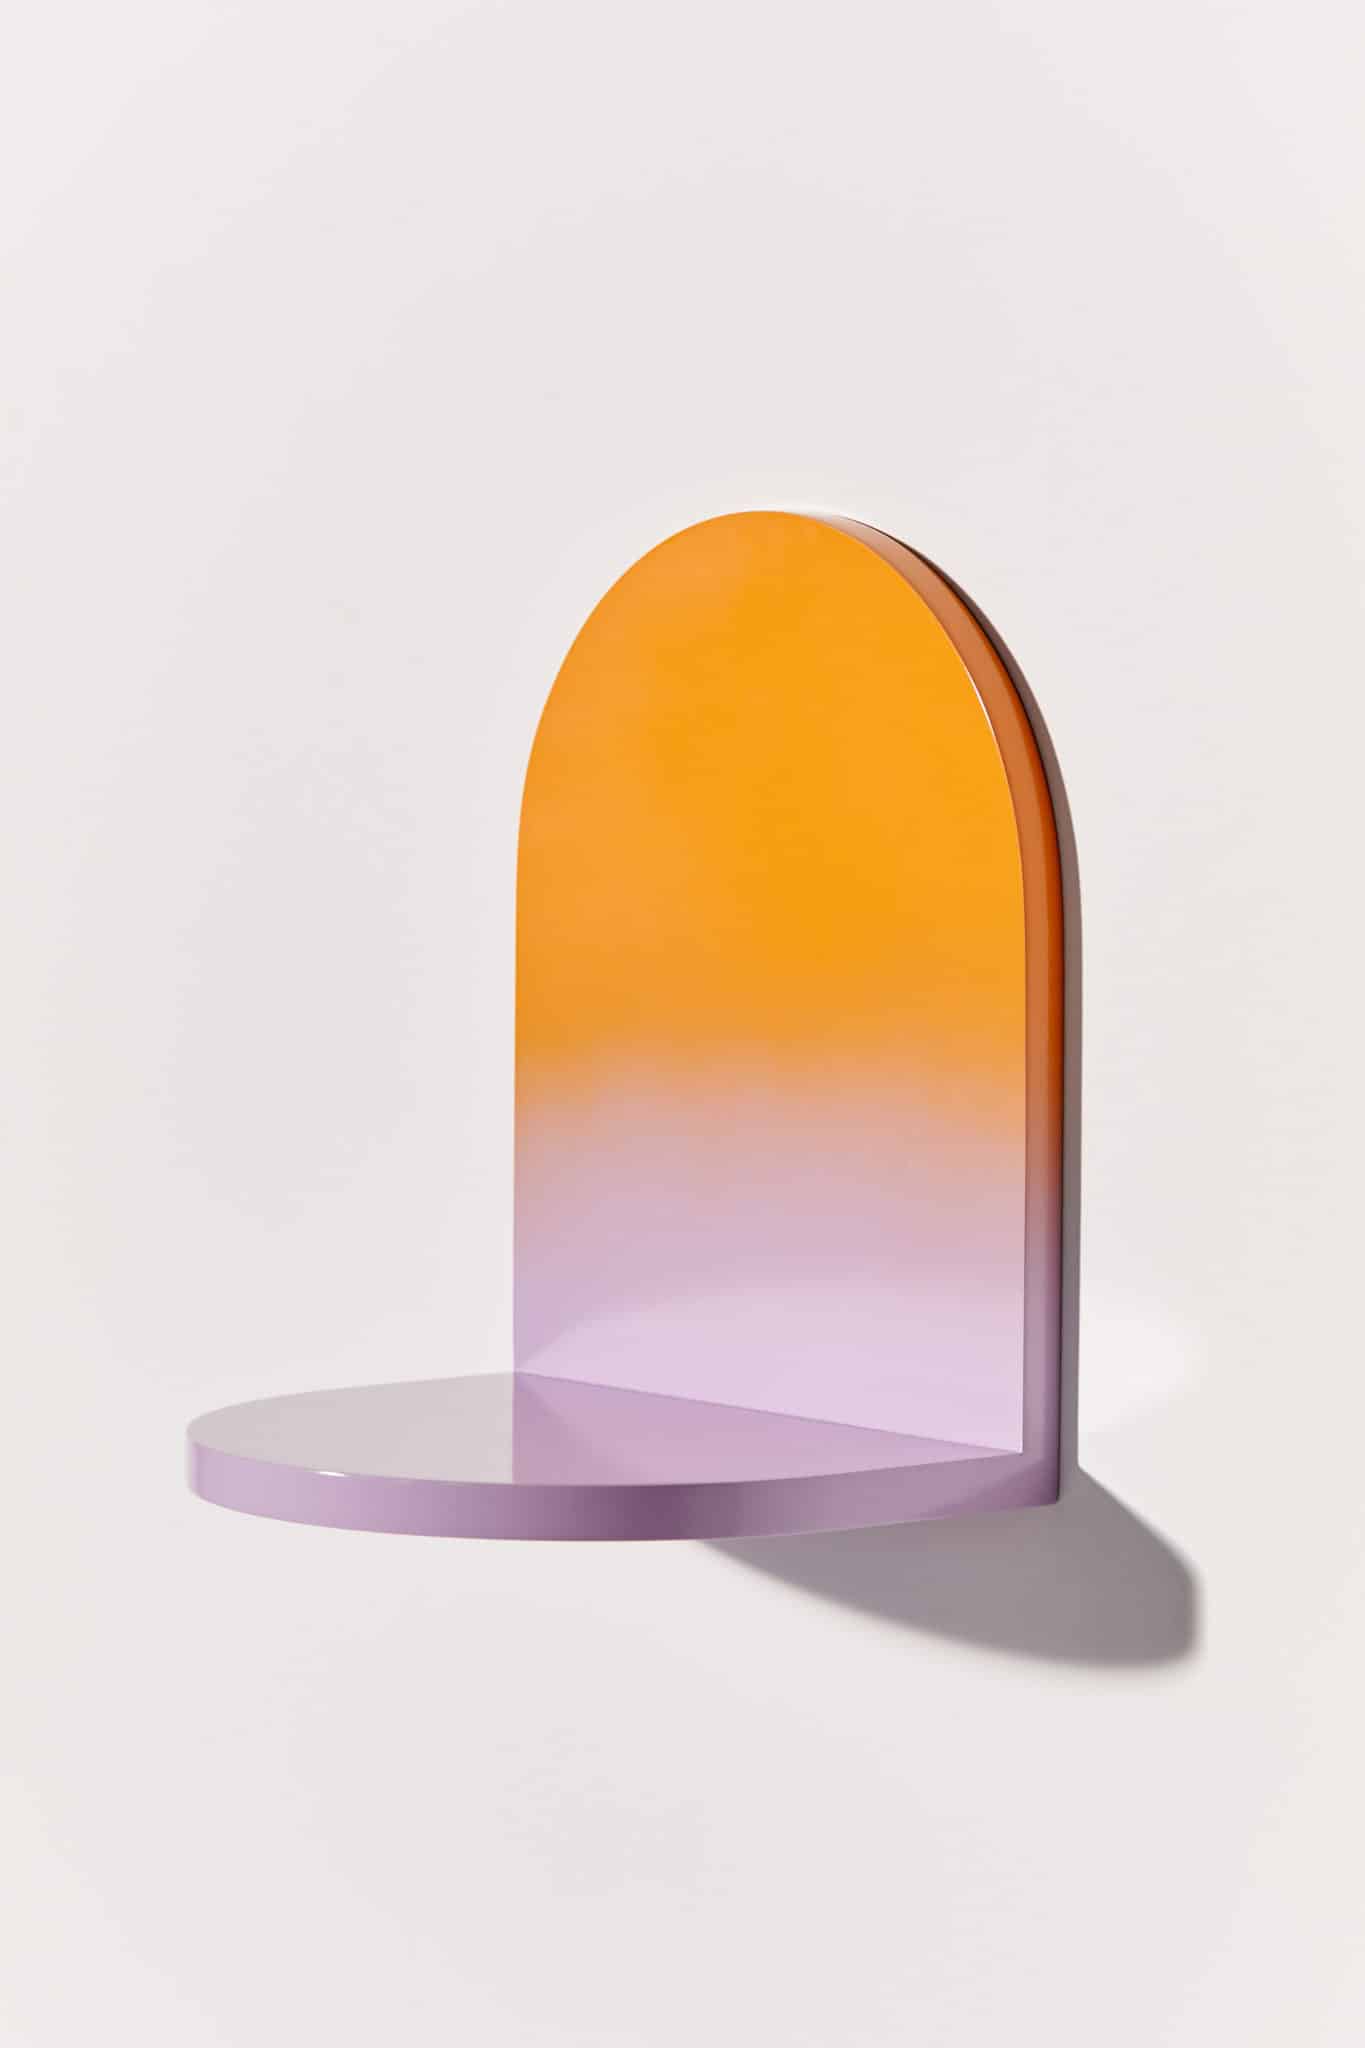 Lacquered and colorful furniture on Urban Outfitters x Clever